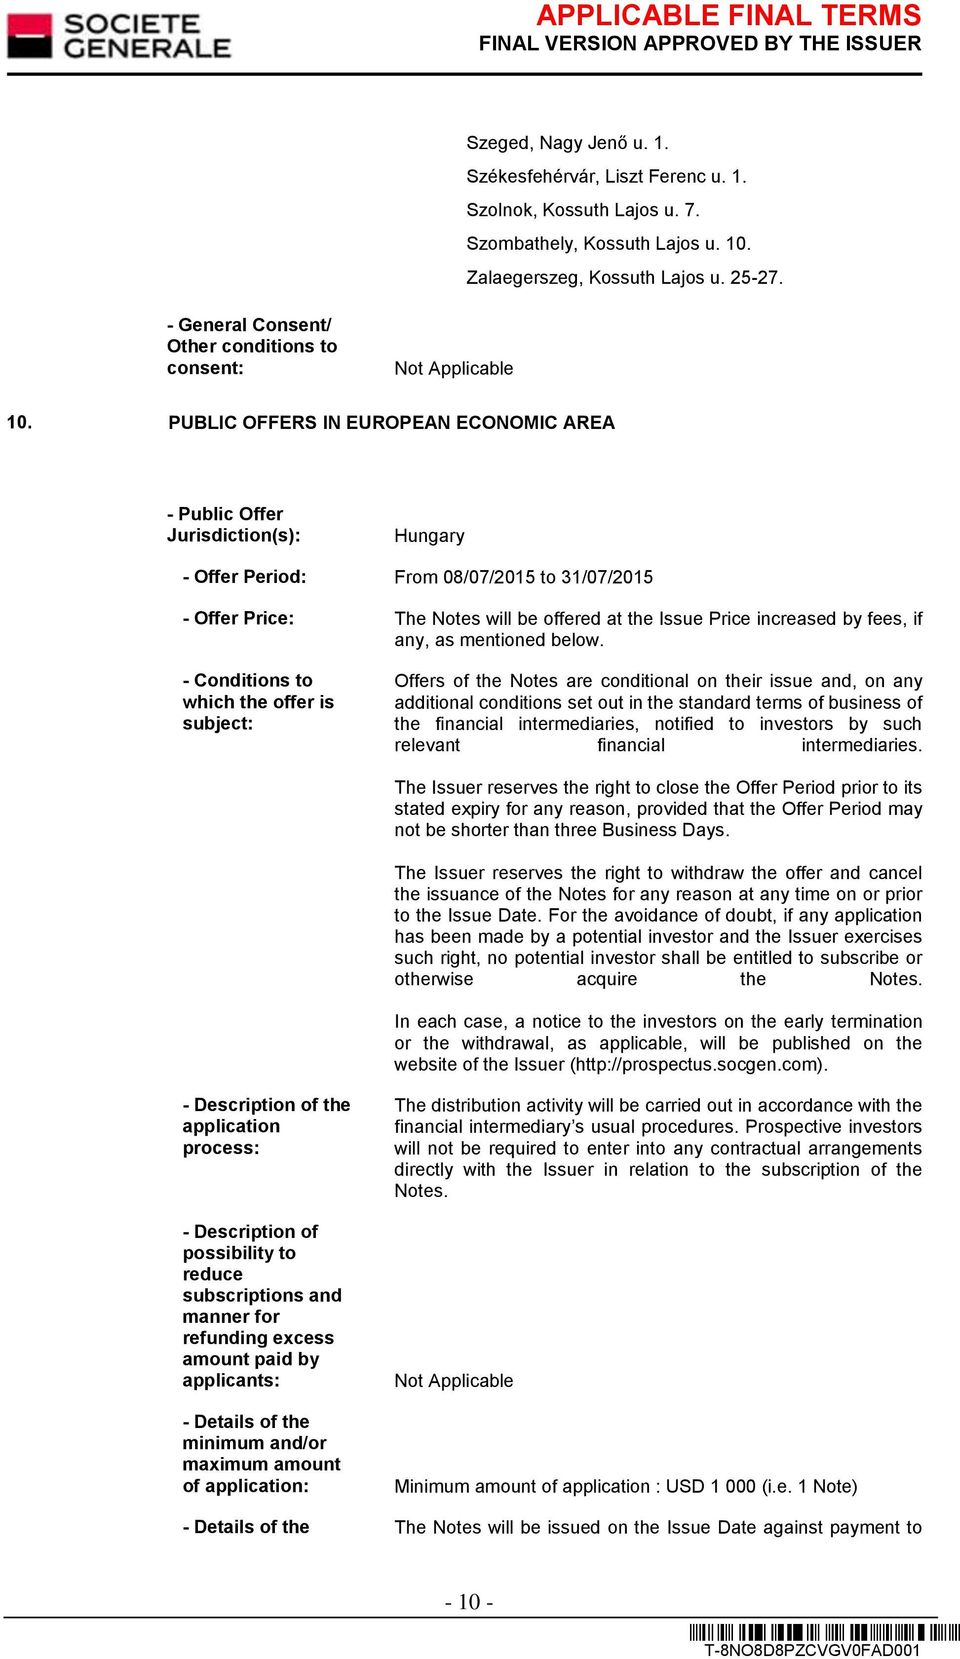 PUBLIC OFFERS IN EUROPEAN ECONOMIC AREA - Public Offer Jurisdiction(s): Hungary - Offer Period: From 08/07/2015 to 31/07/2015 - Offer Price: The Notes will be offered at the Issue Price increased by